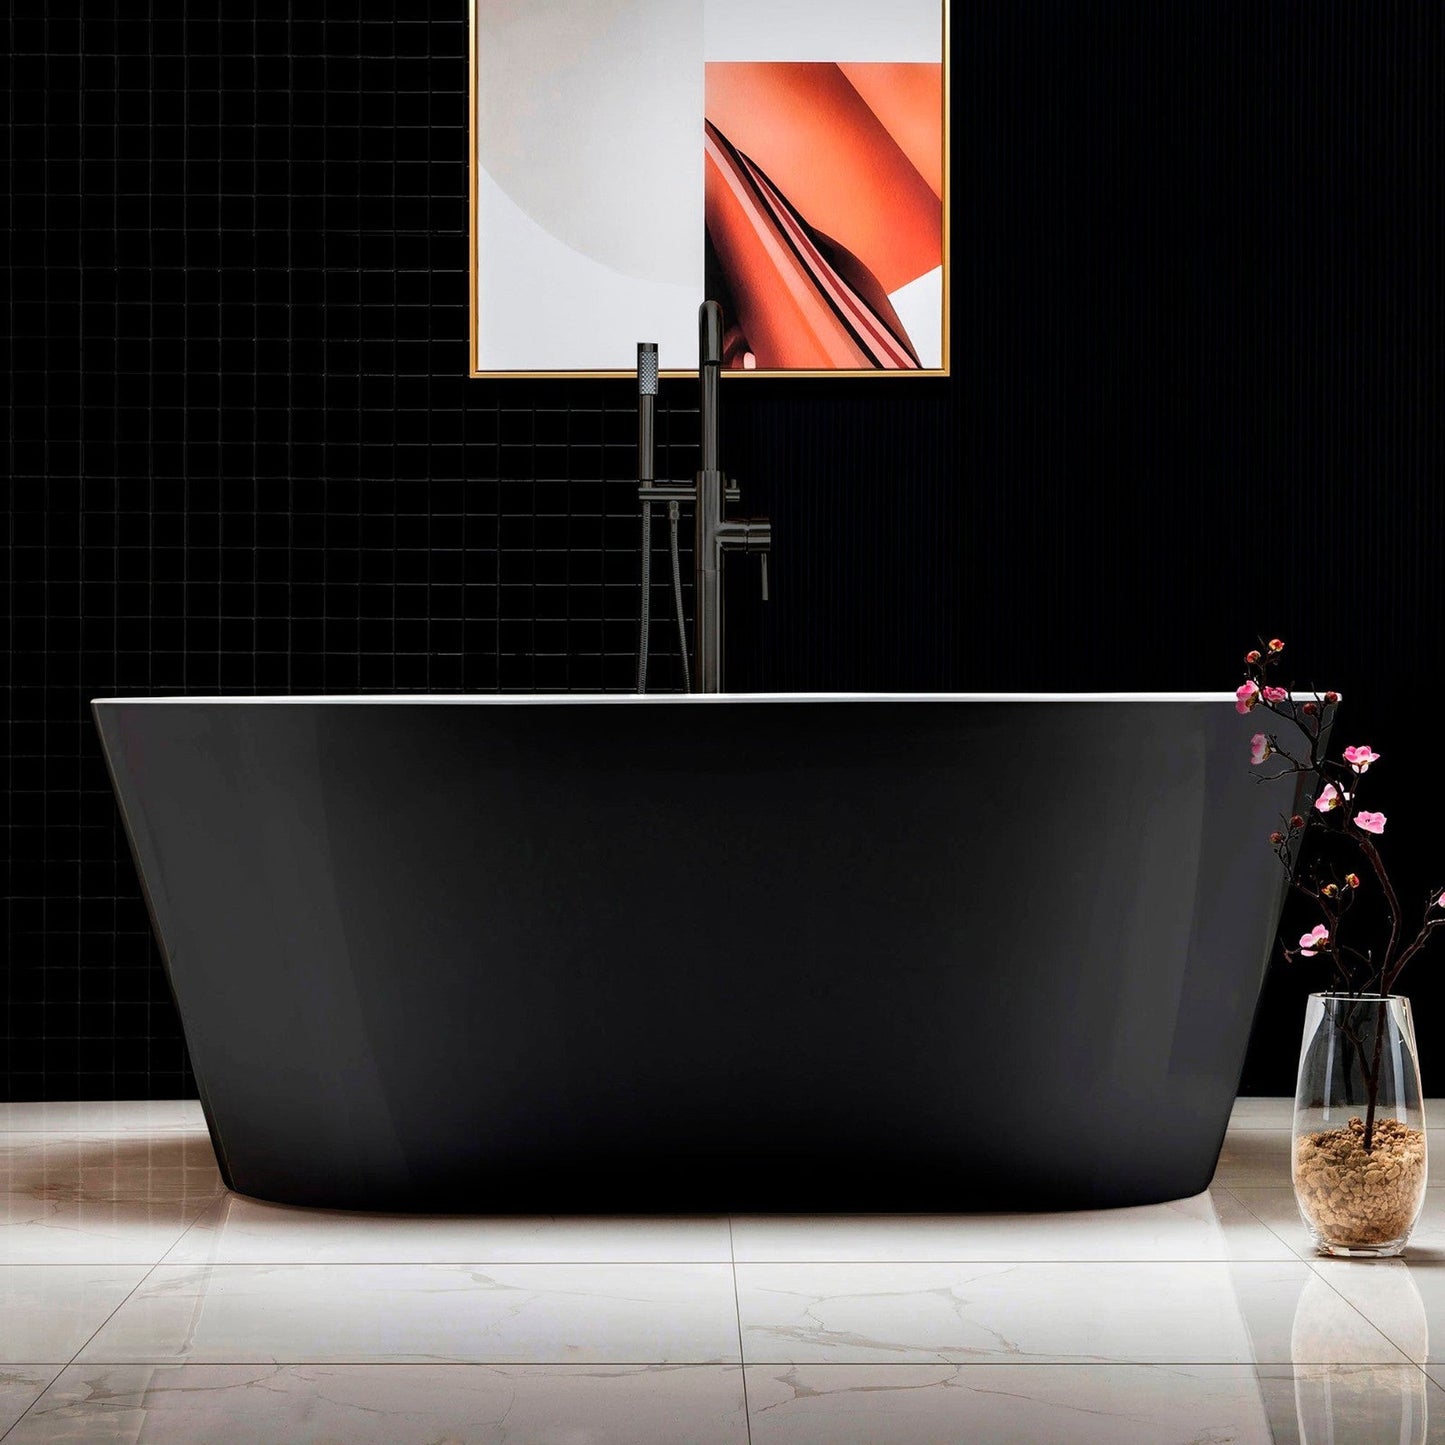 WoodBridge 59" Black Acrylic Freestanding Contemporary Soaking Bathtub With Matte Black Drain, Overflow, F0072MBVT Tub Filler and Caddy Tray